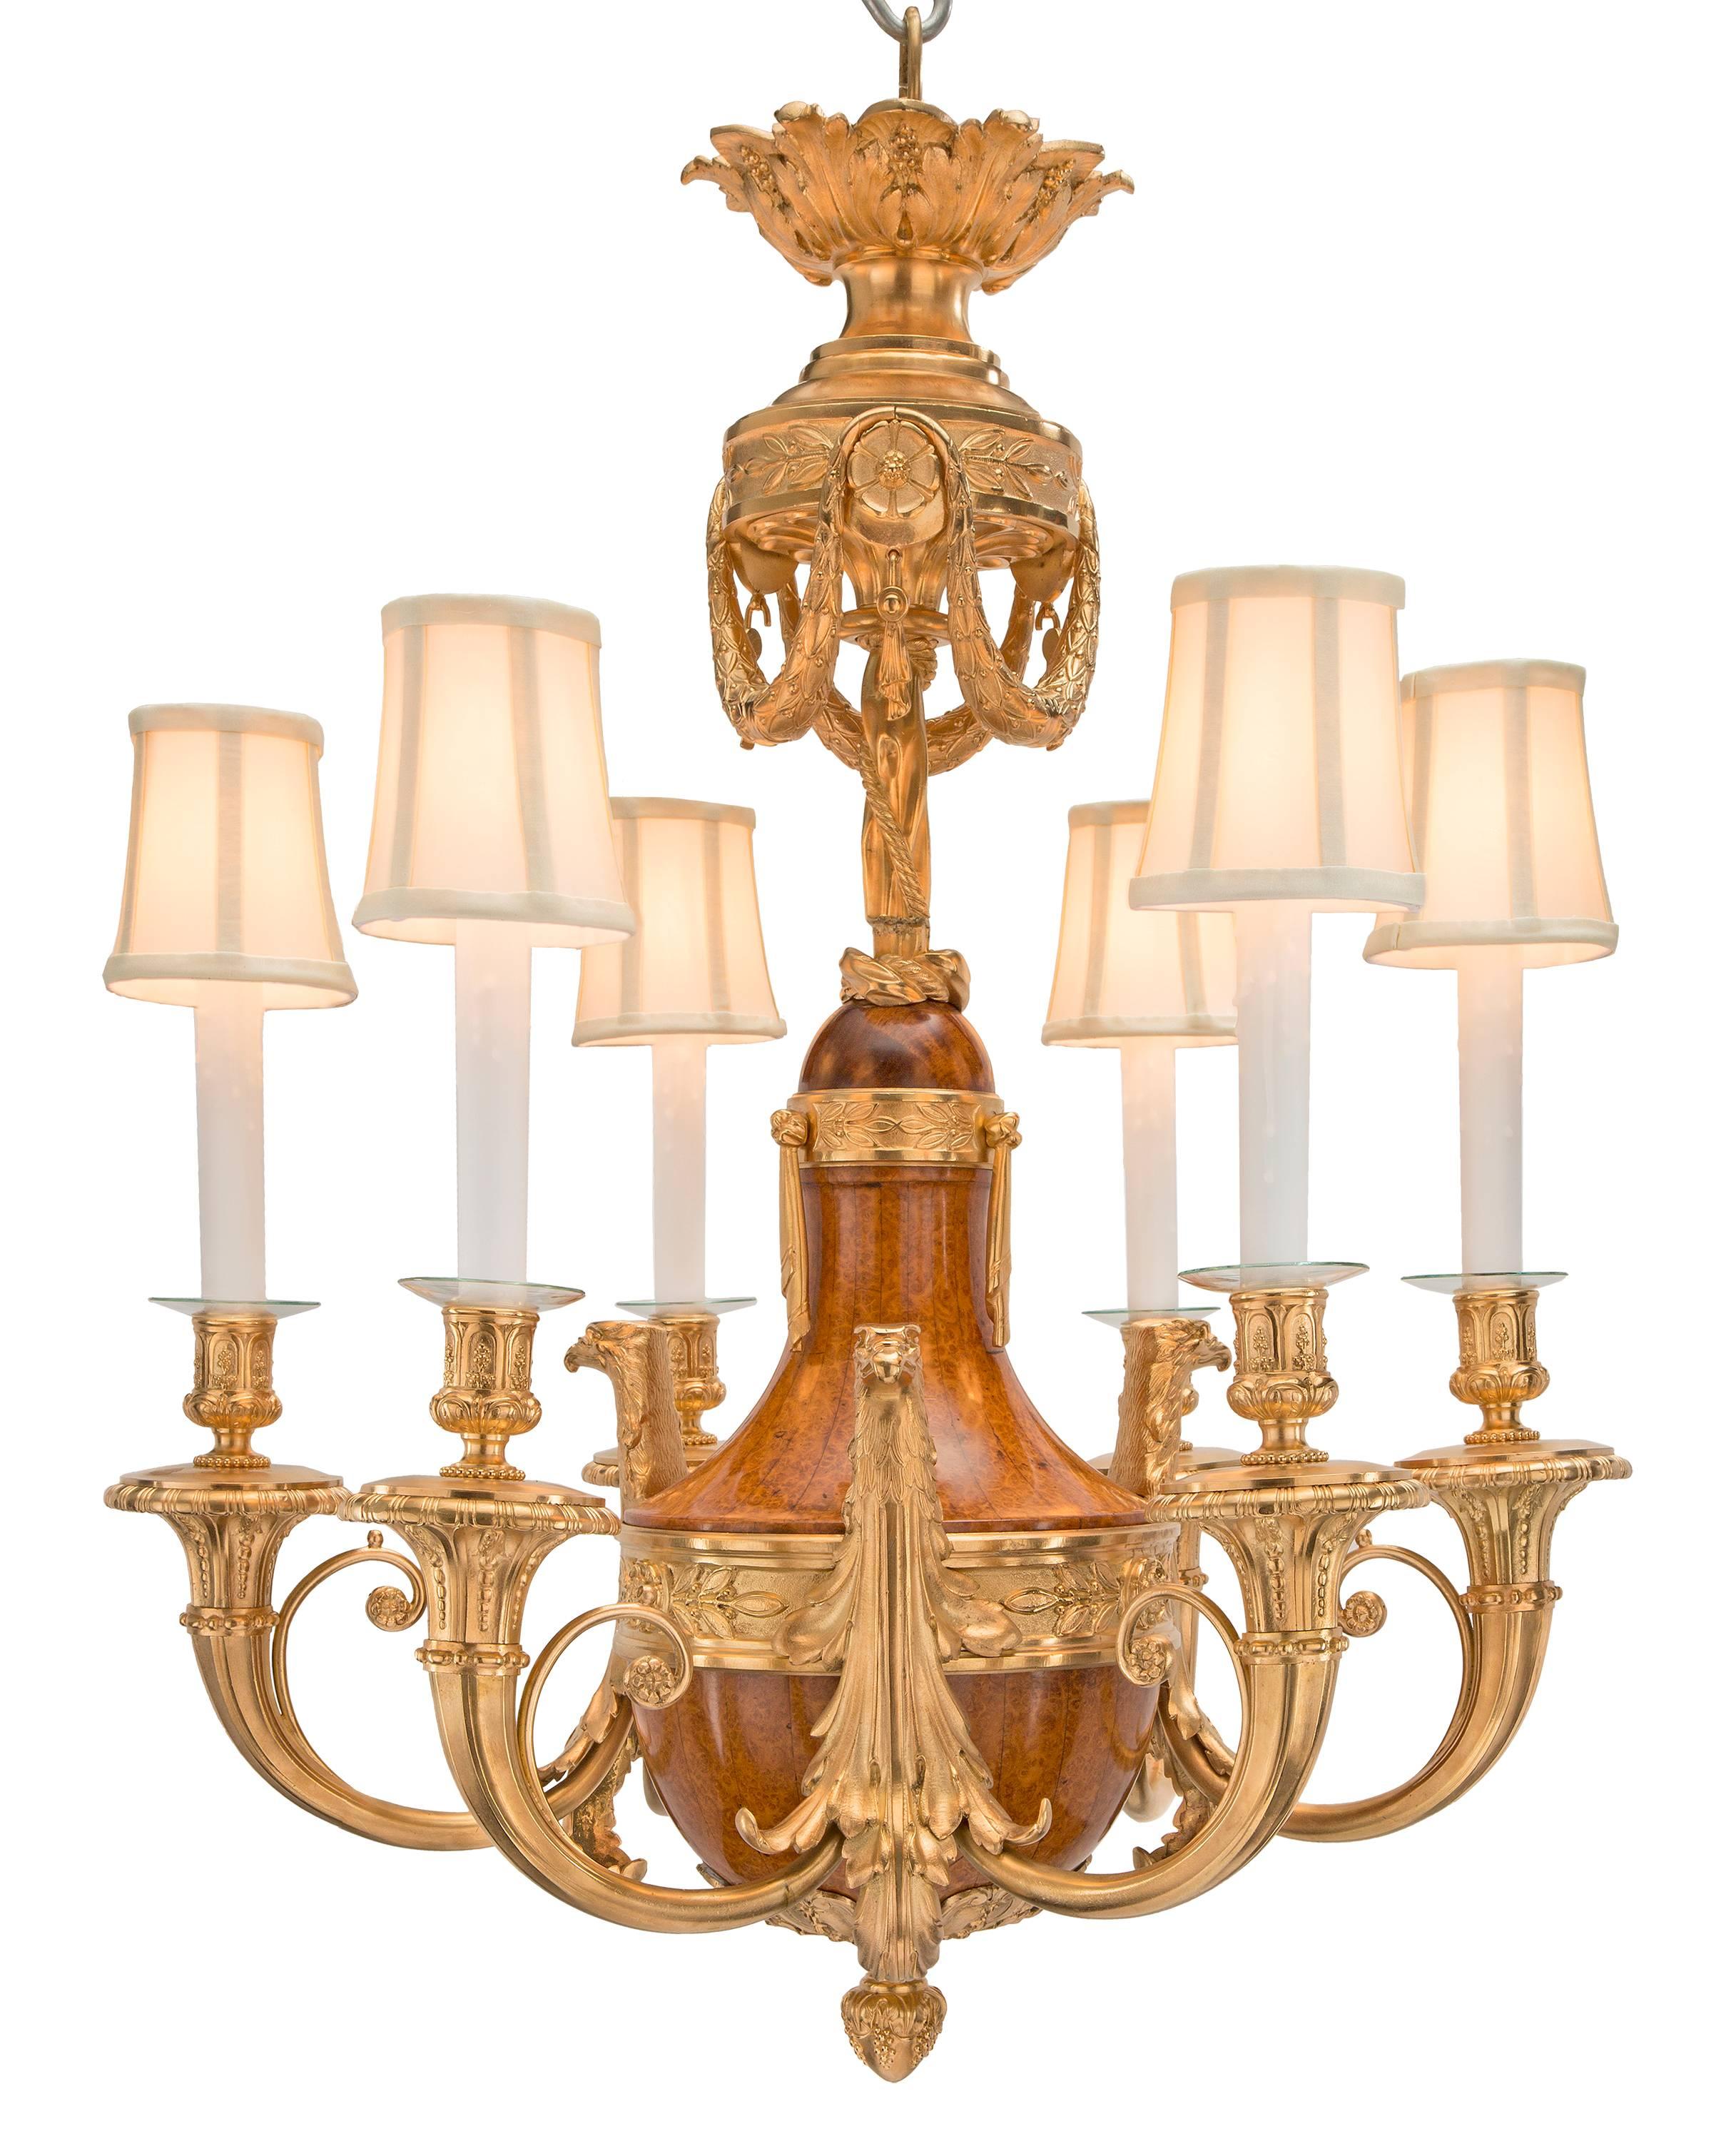 A wonderful and most unique French 19th century neoclassical st. burl walnut and ormolu six-arm chandelier. The elegant chandelier is centered by a richly chased inverted ormolu bottom final amidst fabulous foliate patterns with a hammered design in